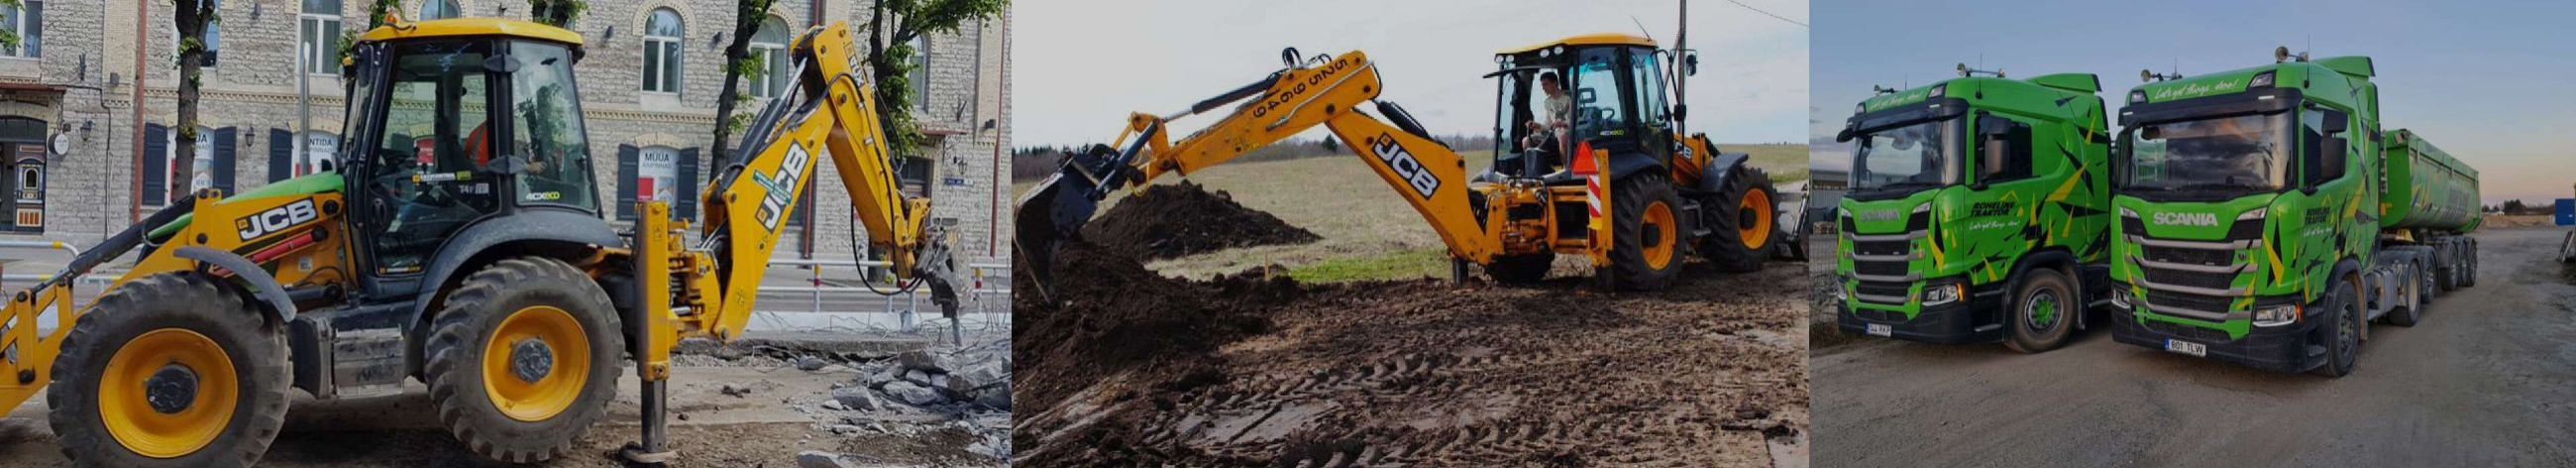 We provide expert loader-excavator and dump truck services, specializing in demolition, land smoothing, material distribution, snow removal, site preparation, and land restoration.